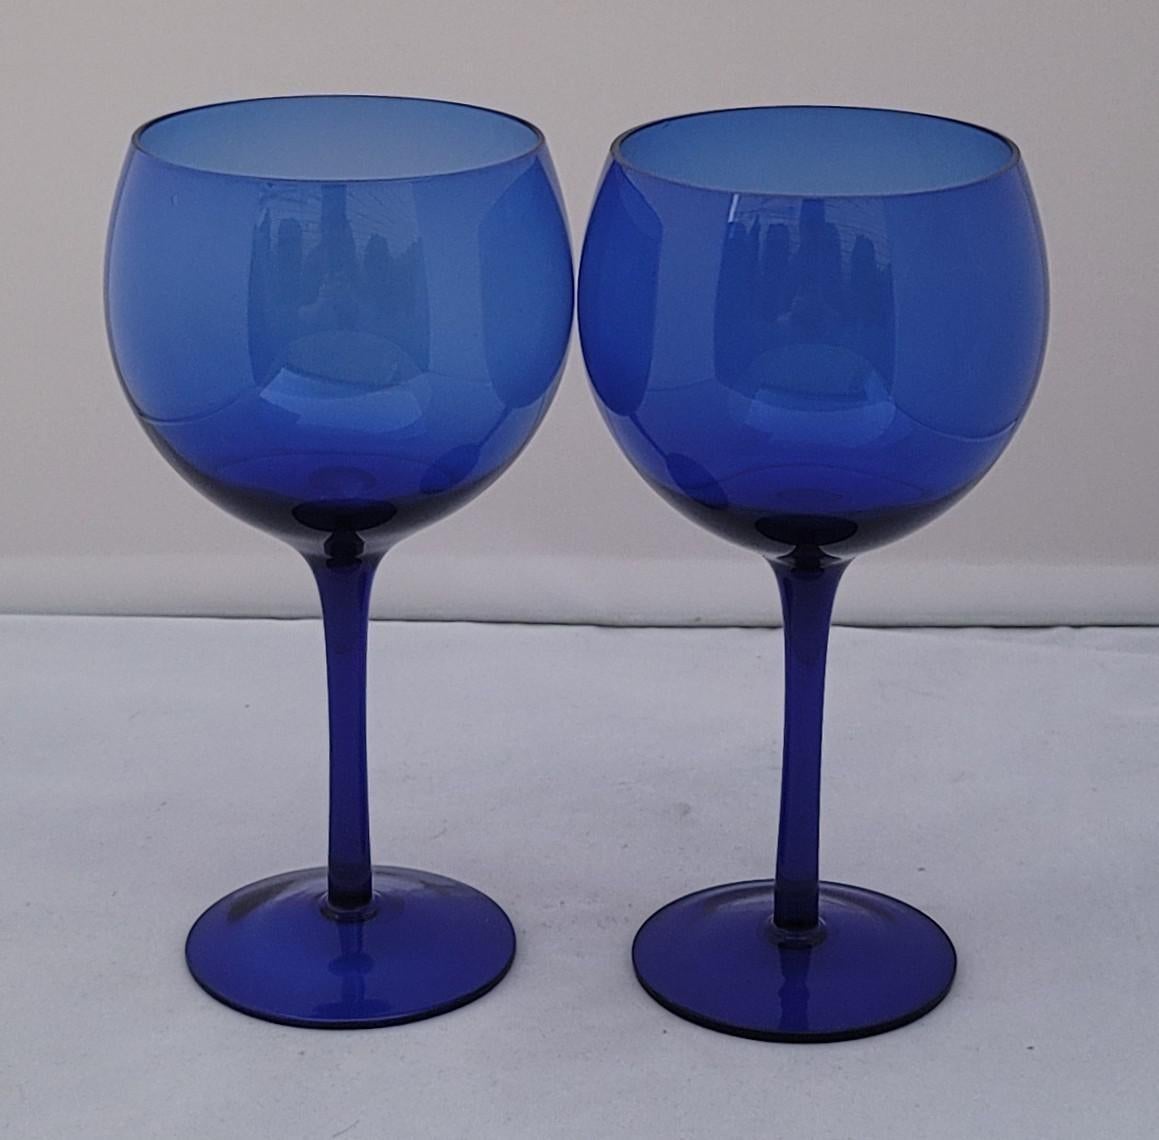 Lovely voluminous wine goblets with large cups provide plenty of space for your wine to breathe properly. In a beautiful shade of blue that can fit with either cobalt or look great with a classic navy, these wine goblets are the perfect pair for